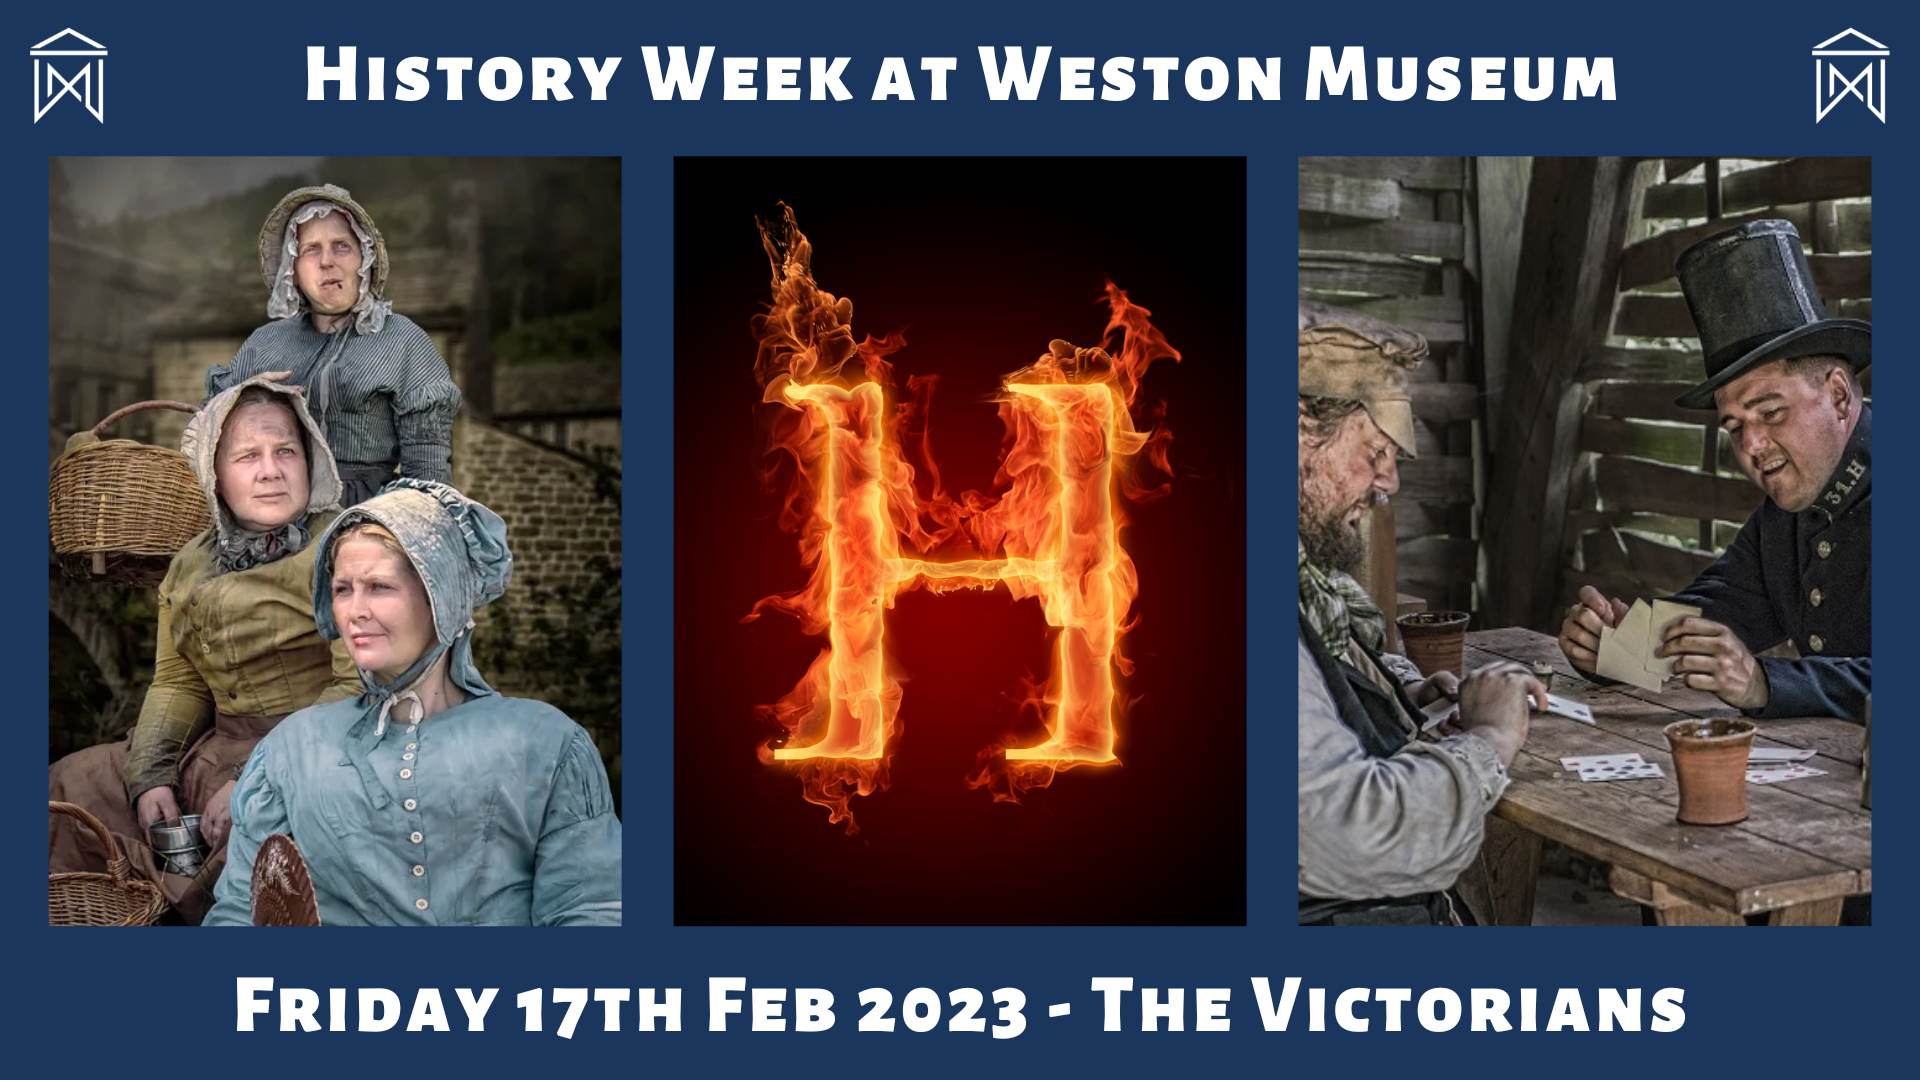 Friday 17th Feb 2023 The Victorians